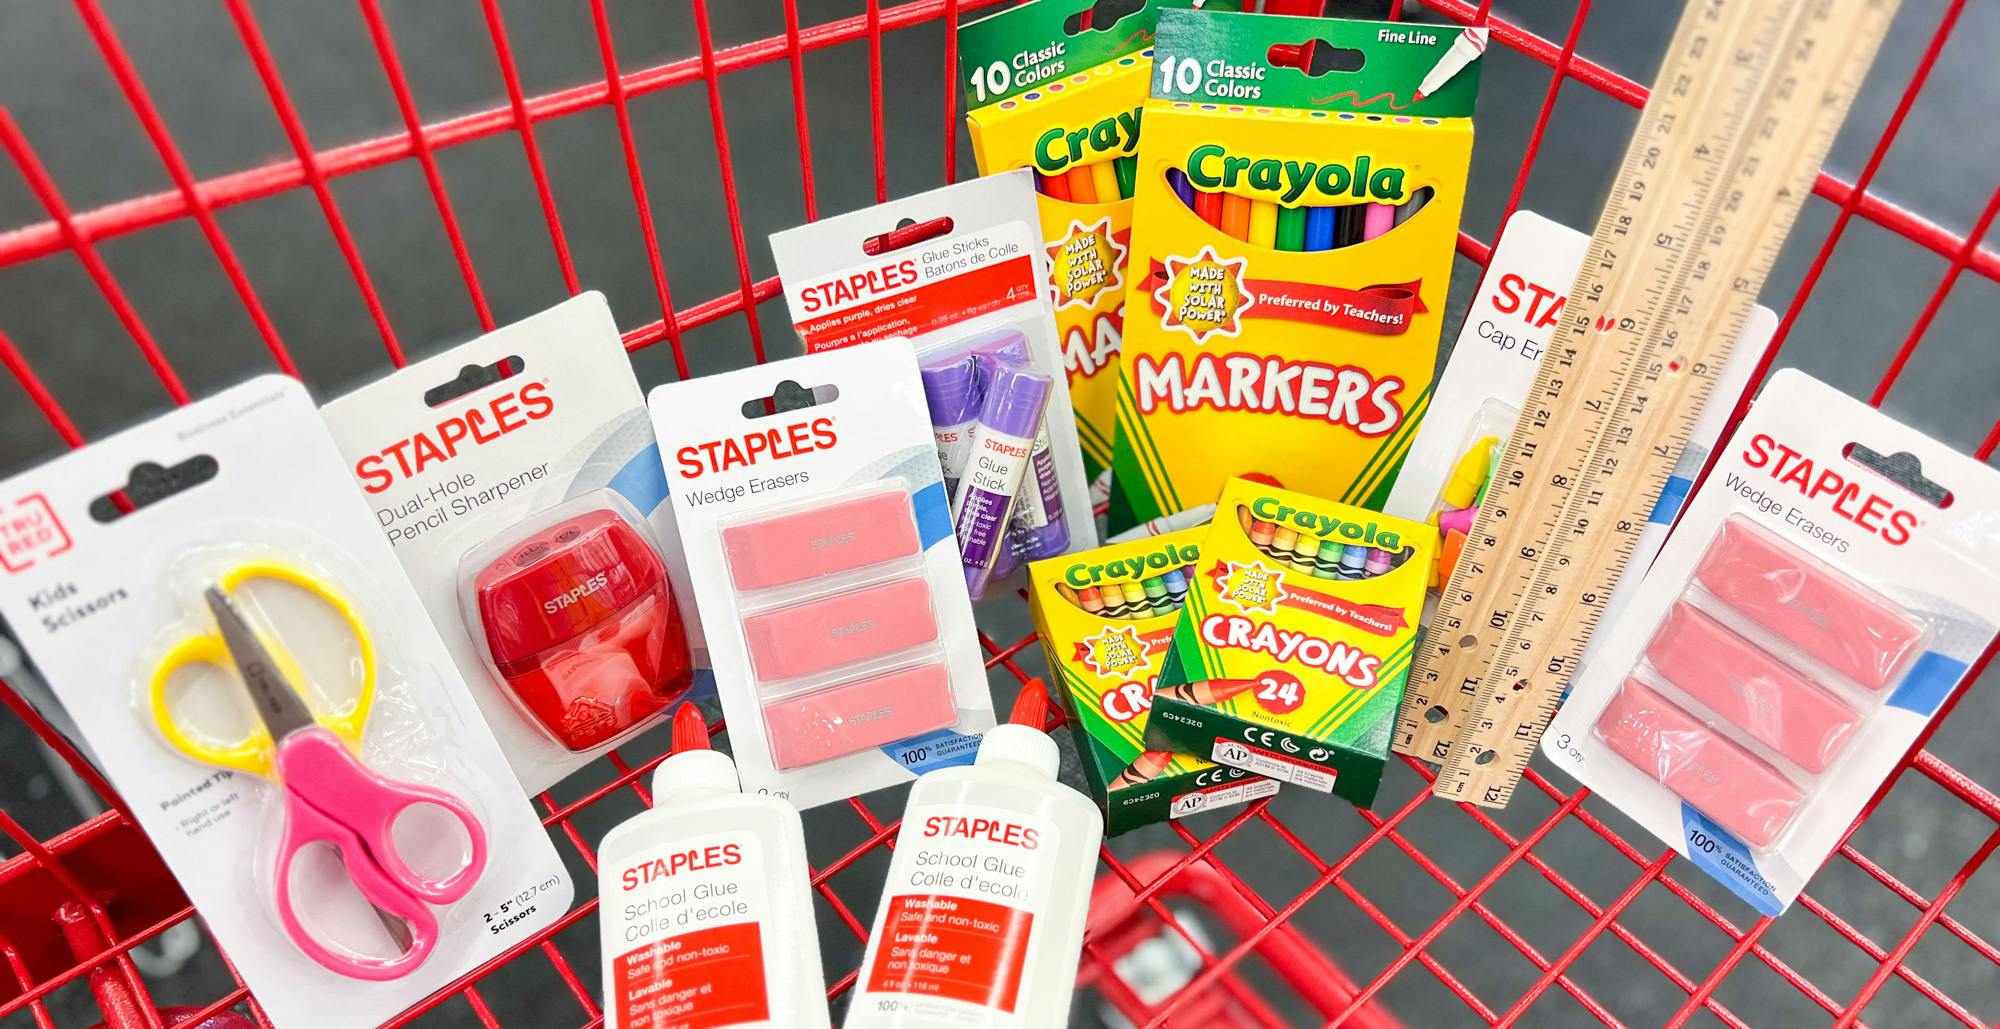 18 Staples Shopping Tips to Help You Win at Office Supplies - The Krazy  Coupon Lady